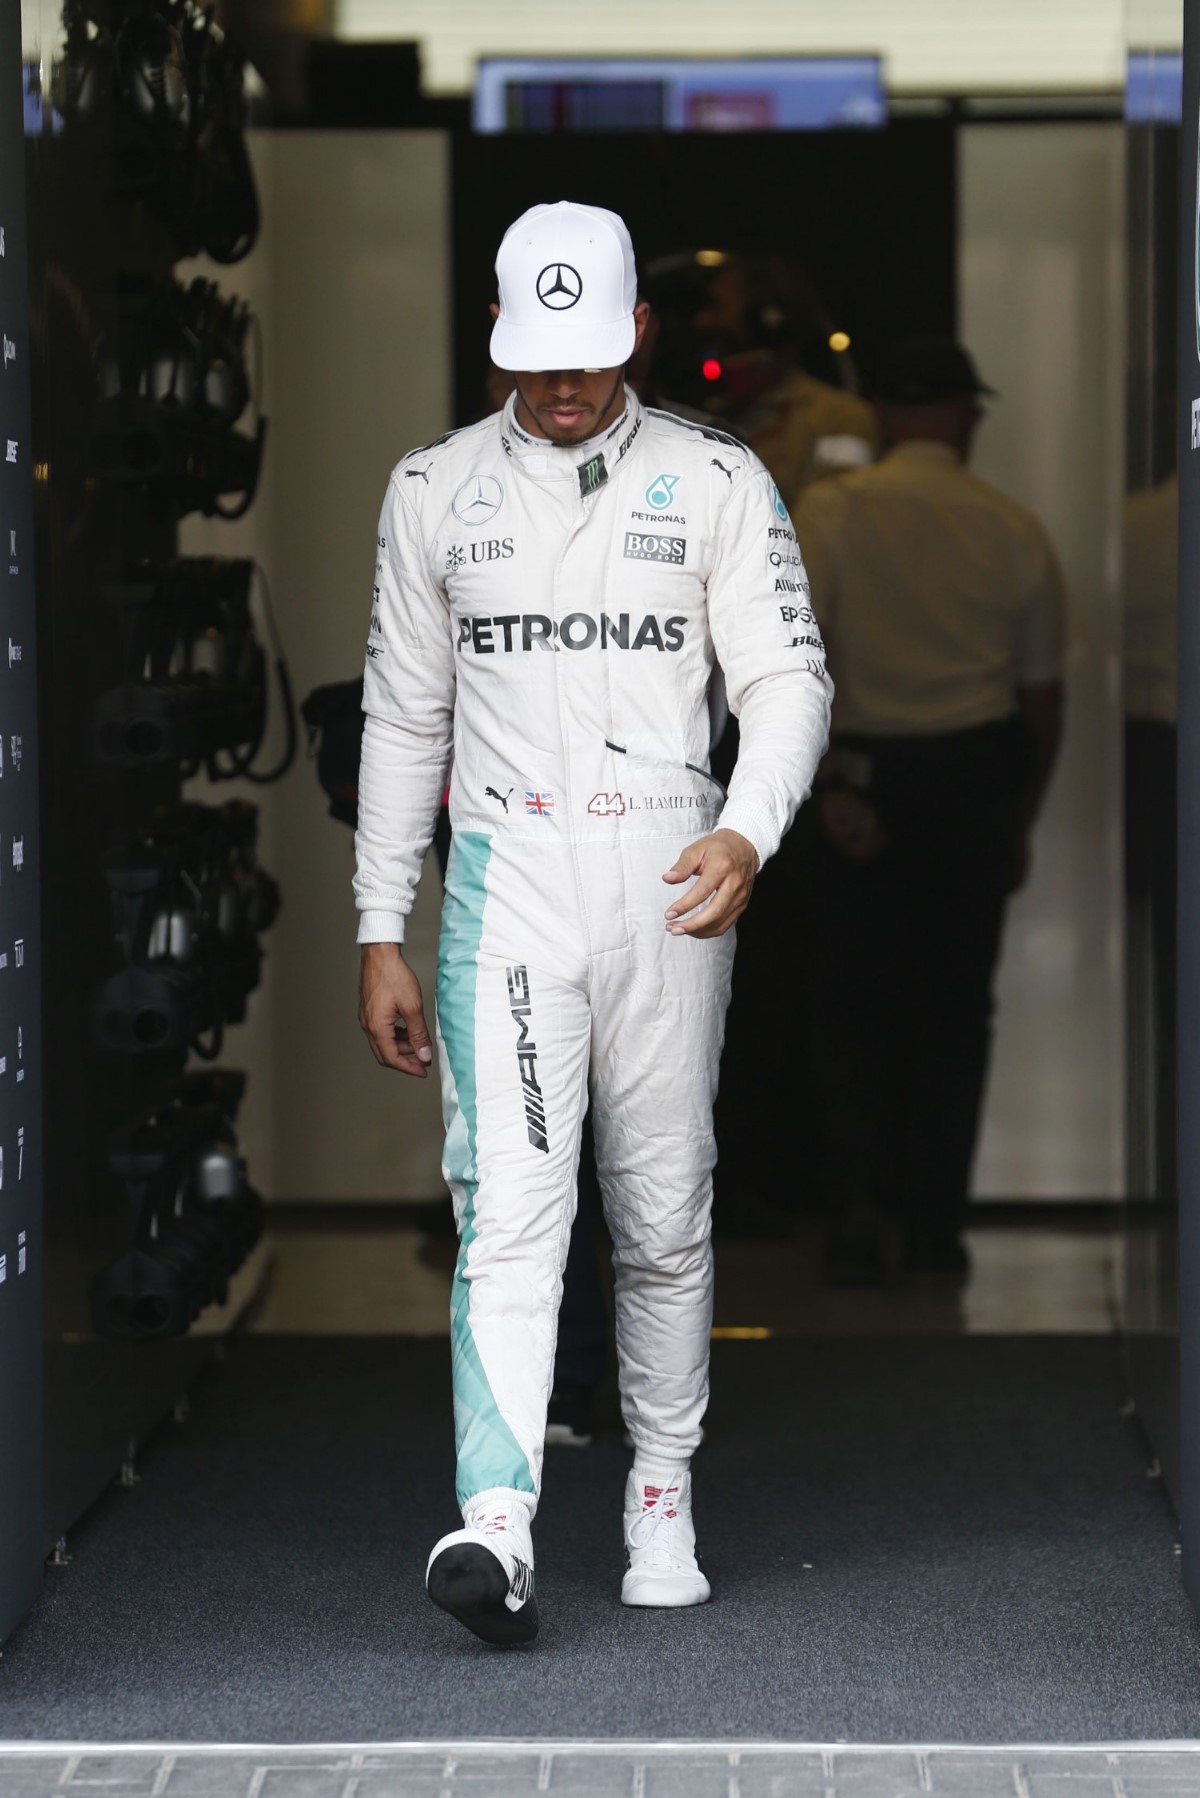 Hamilton head low after Abu Dhabi race - was he told he was fired?